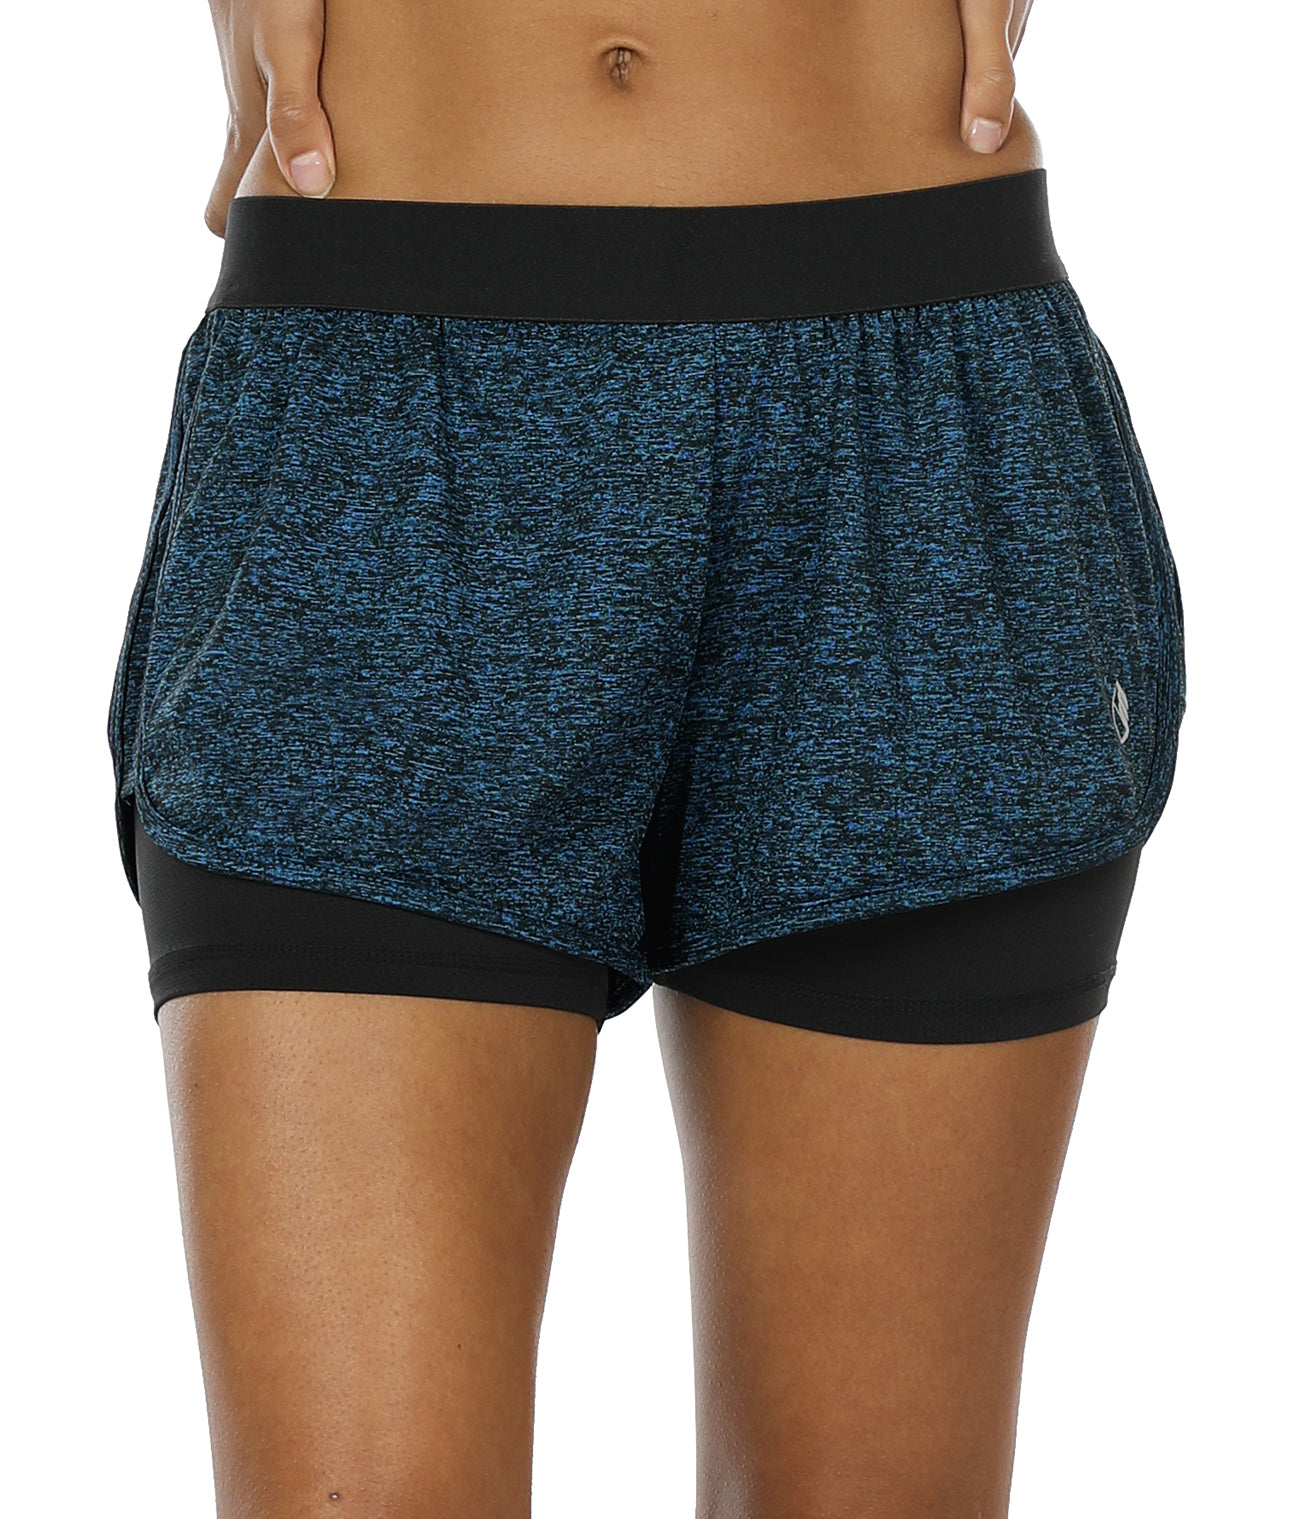 2 In 1 - Athletic Shorts for Women